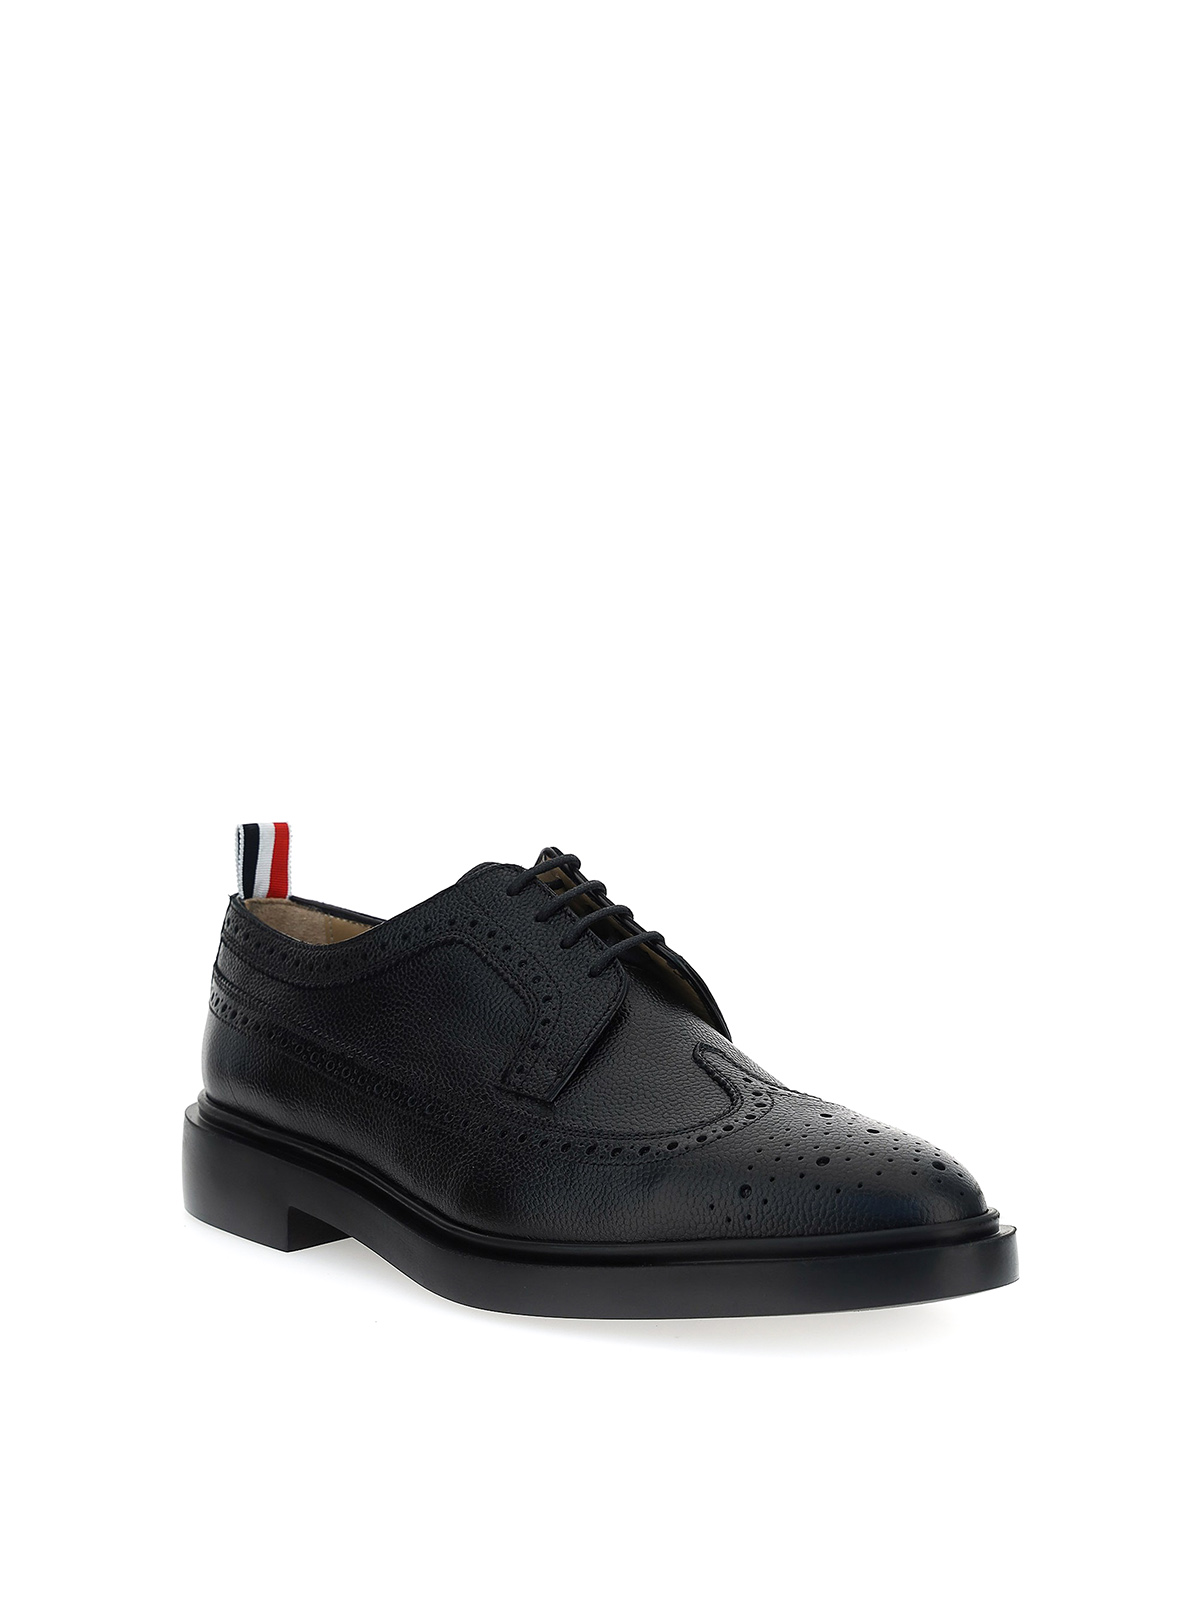 Shop Thom Browne Lace Up Brogues Shoes In Black